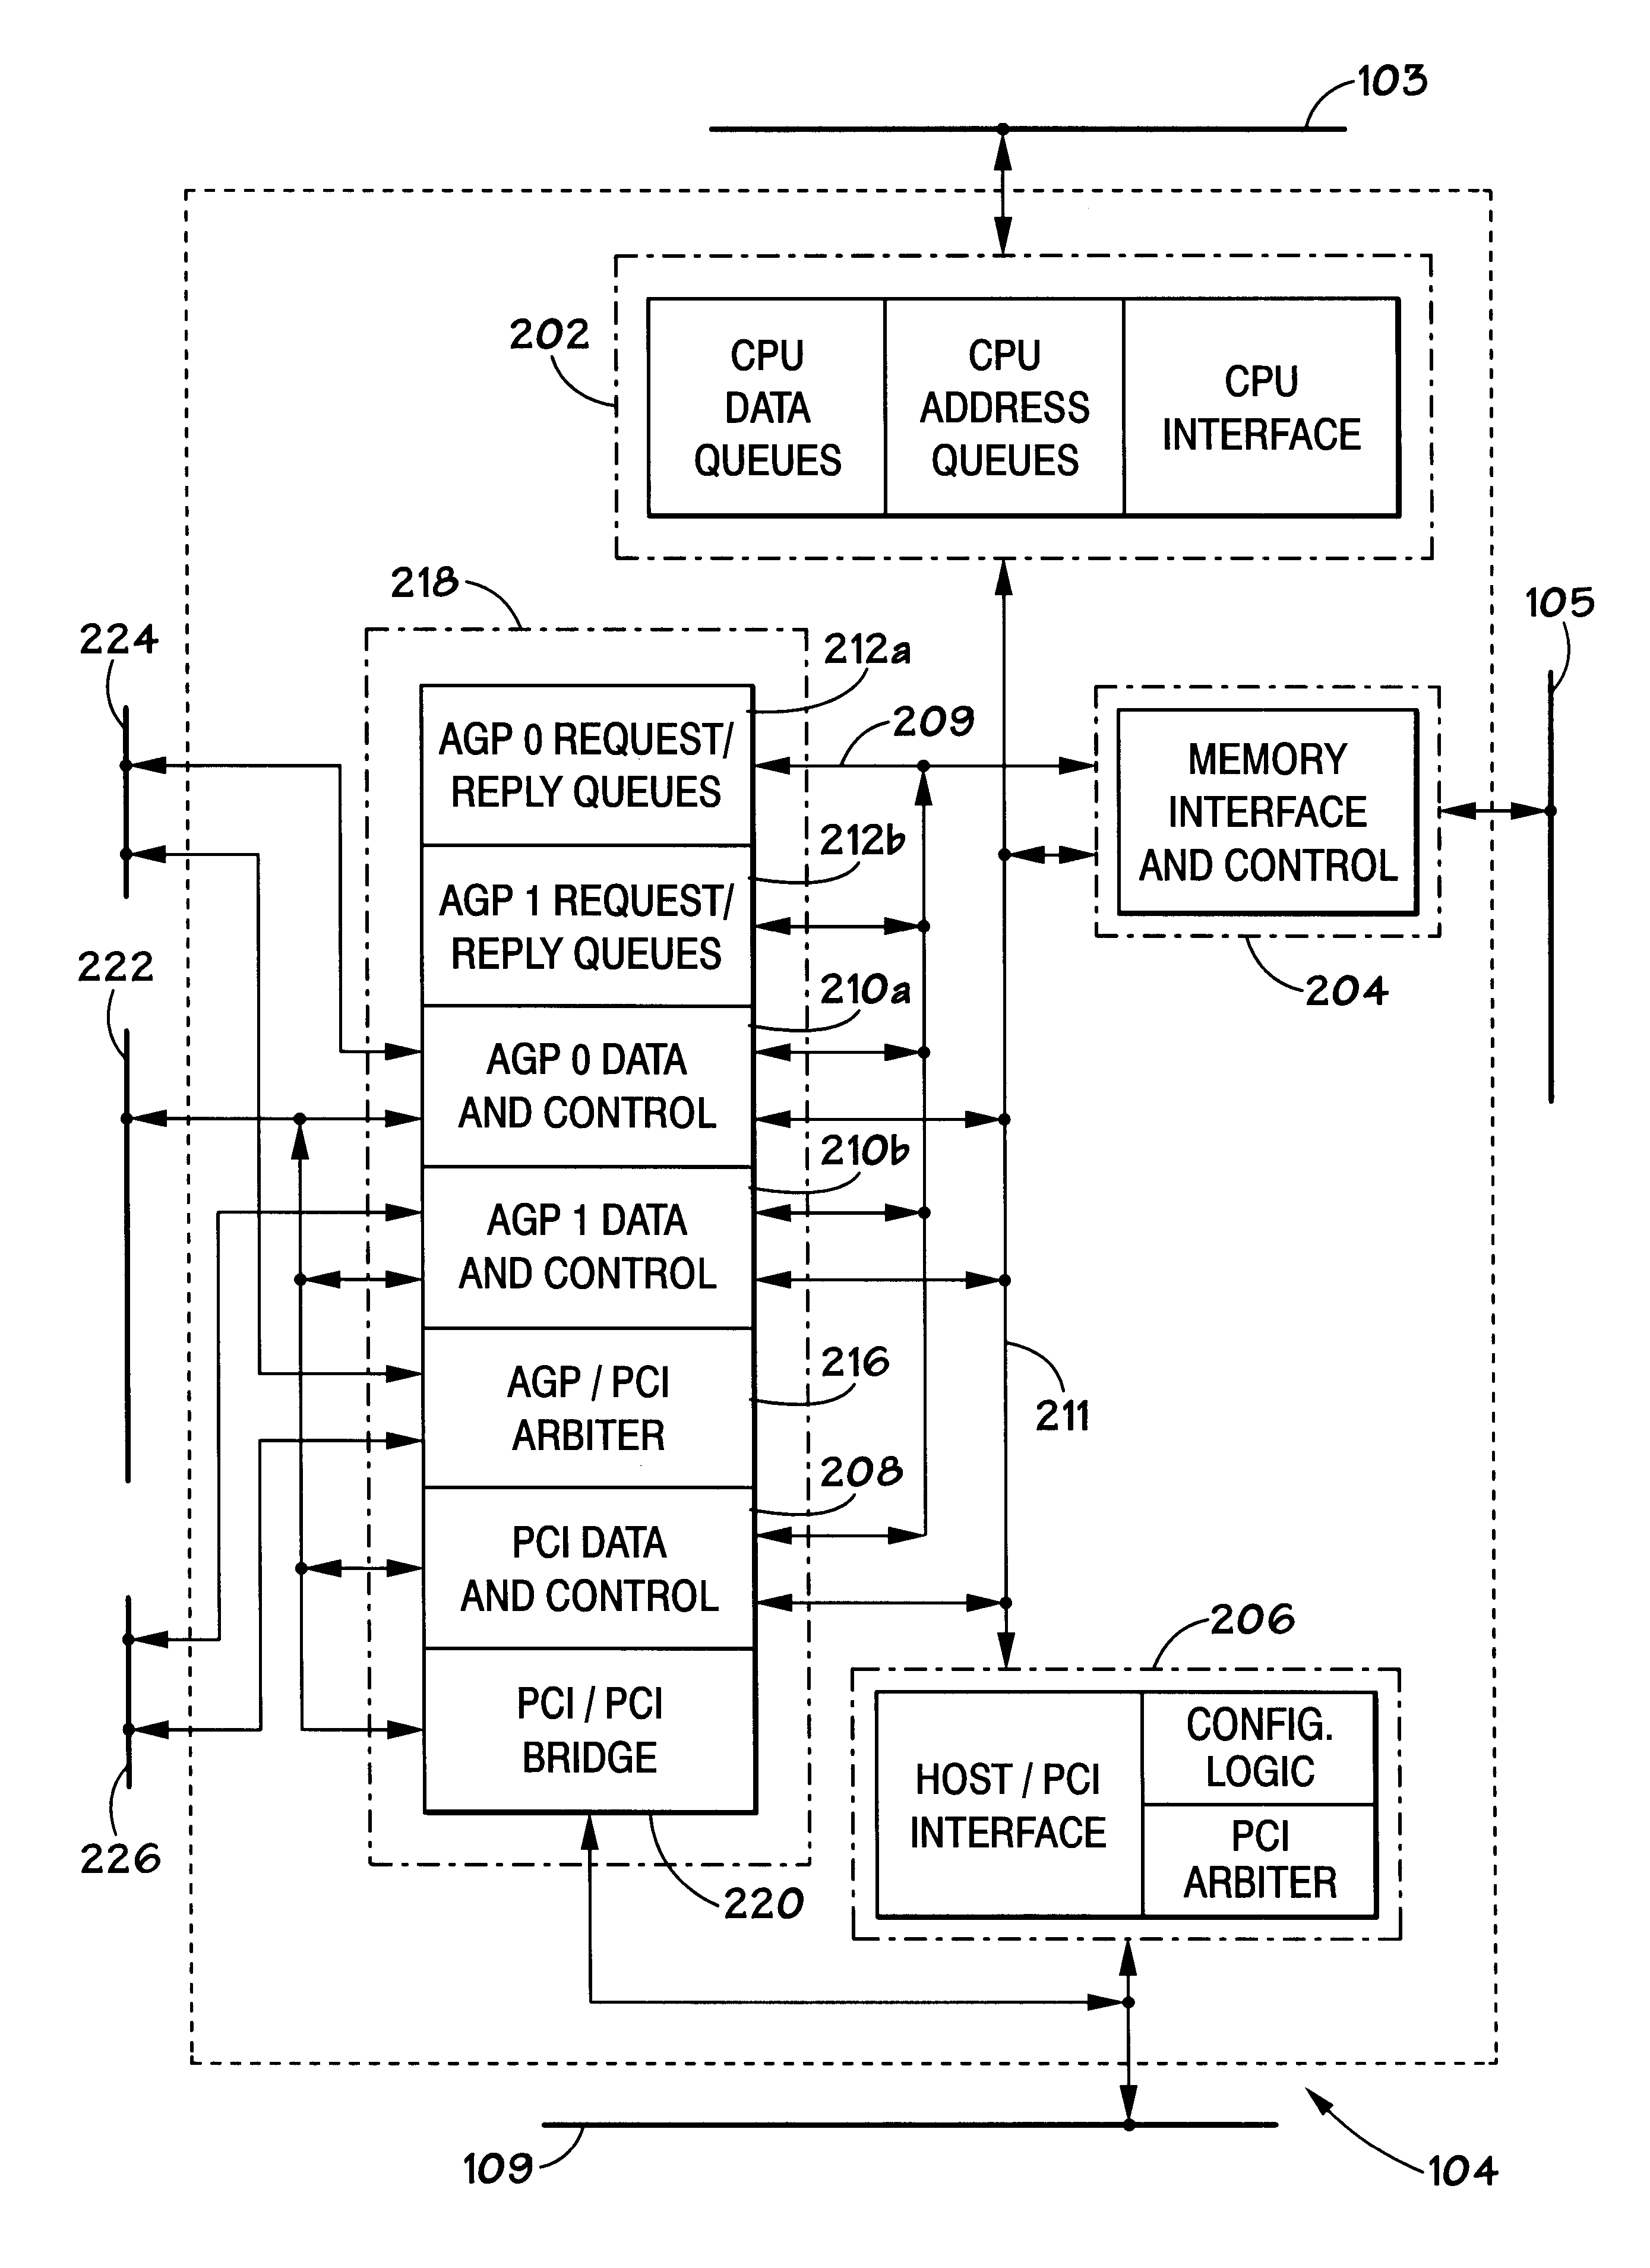 Computer bridge interfaces for accelerated graphics port and peripheral component interconnect devices